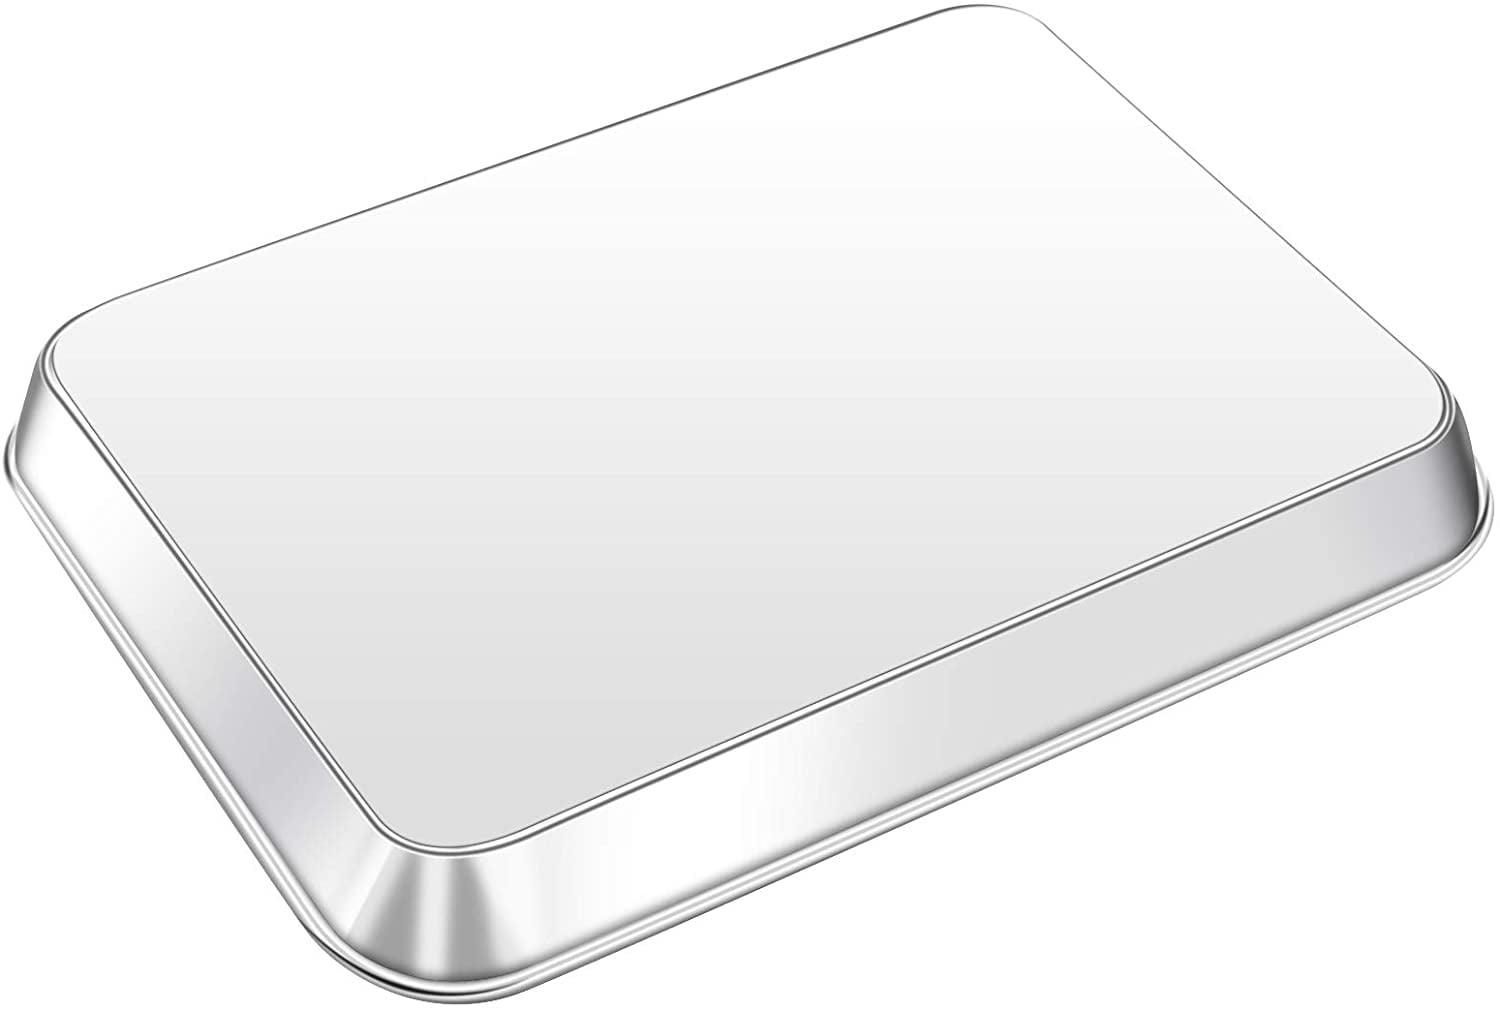 Happon Quality Cookie Sheet Pan - Stainless Steel Half Sheet Baking Pan  ，This 12*9inch Baking Sheet is Rust & Warp Resistant, Heavy Duty, of Thick  Gauge 